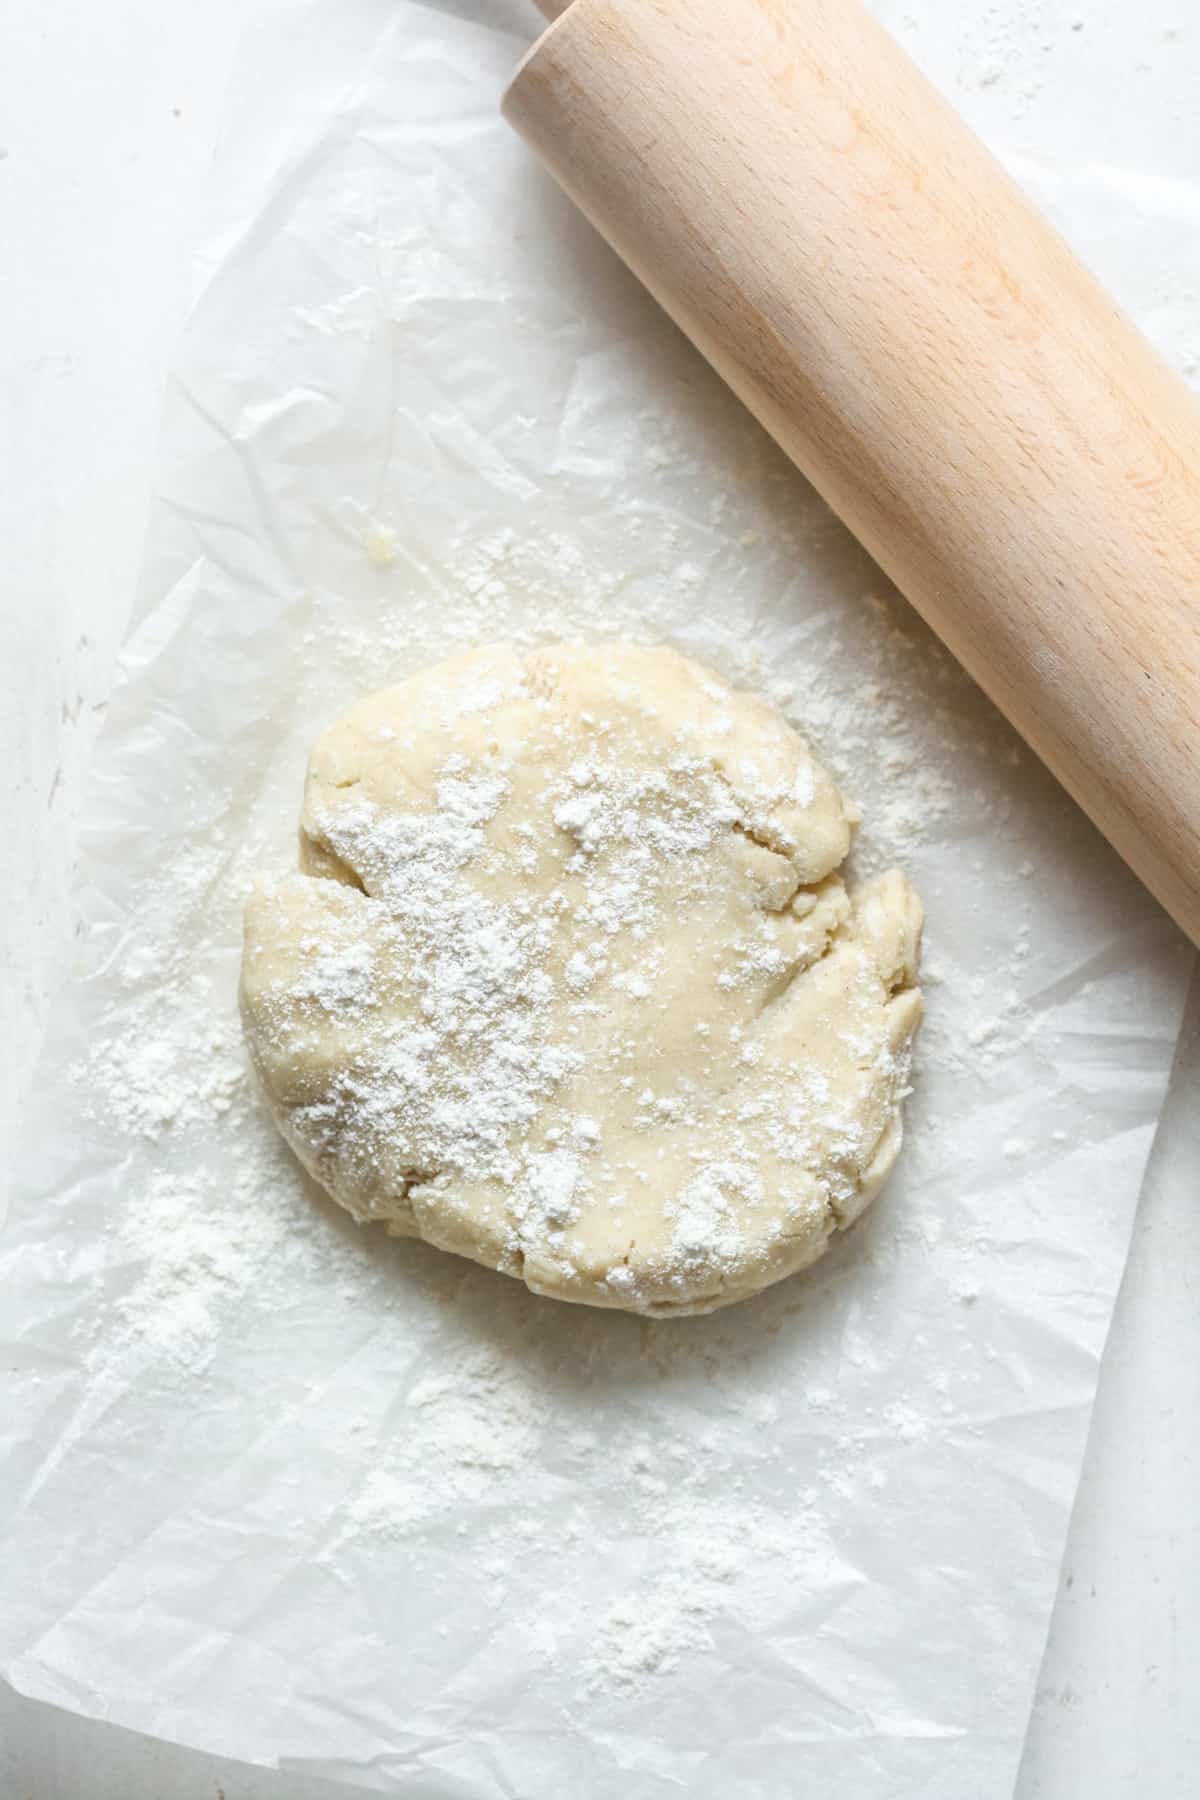 Disc of dough with rolling pin.